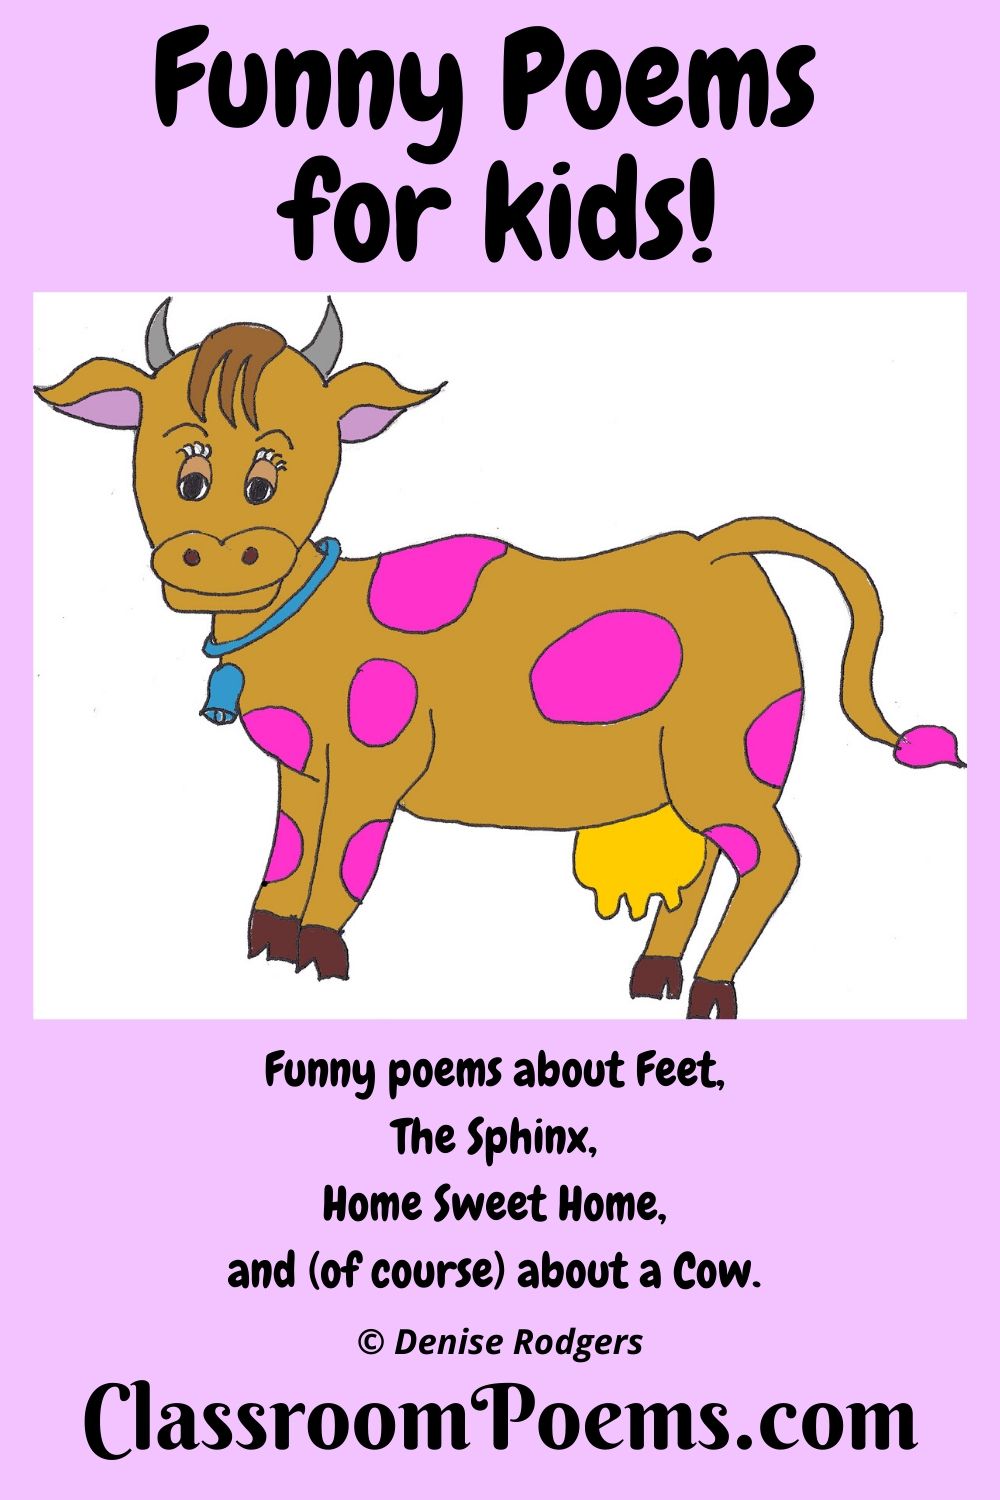 KooKoo Cow poem by Denise Rodgers on ClassroomPoems.com.